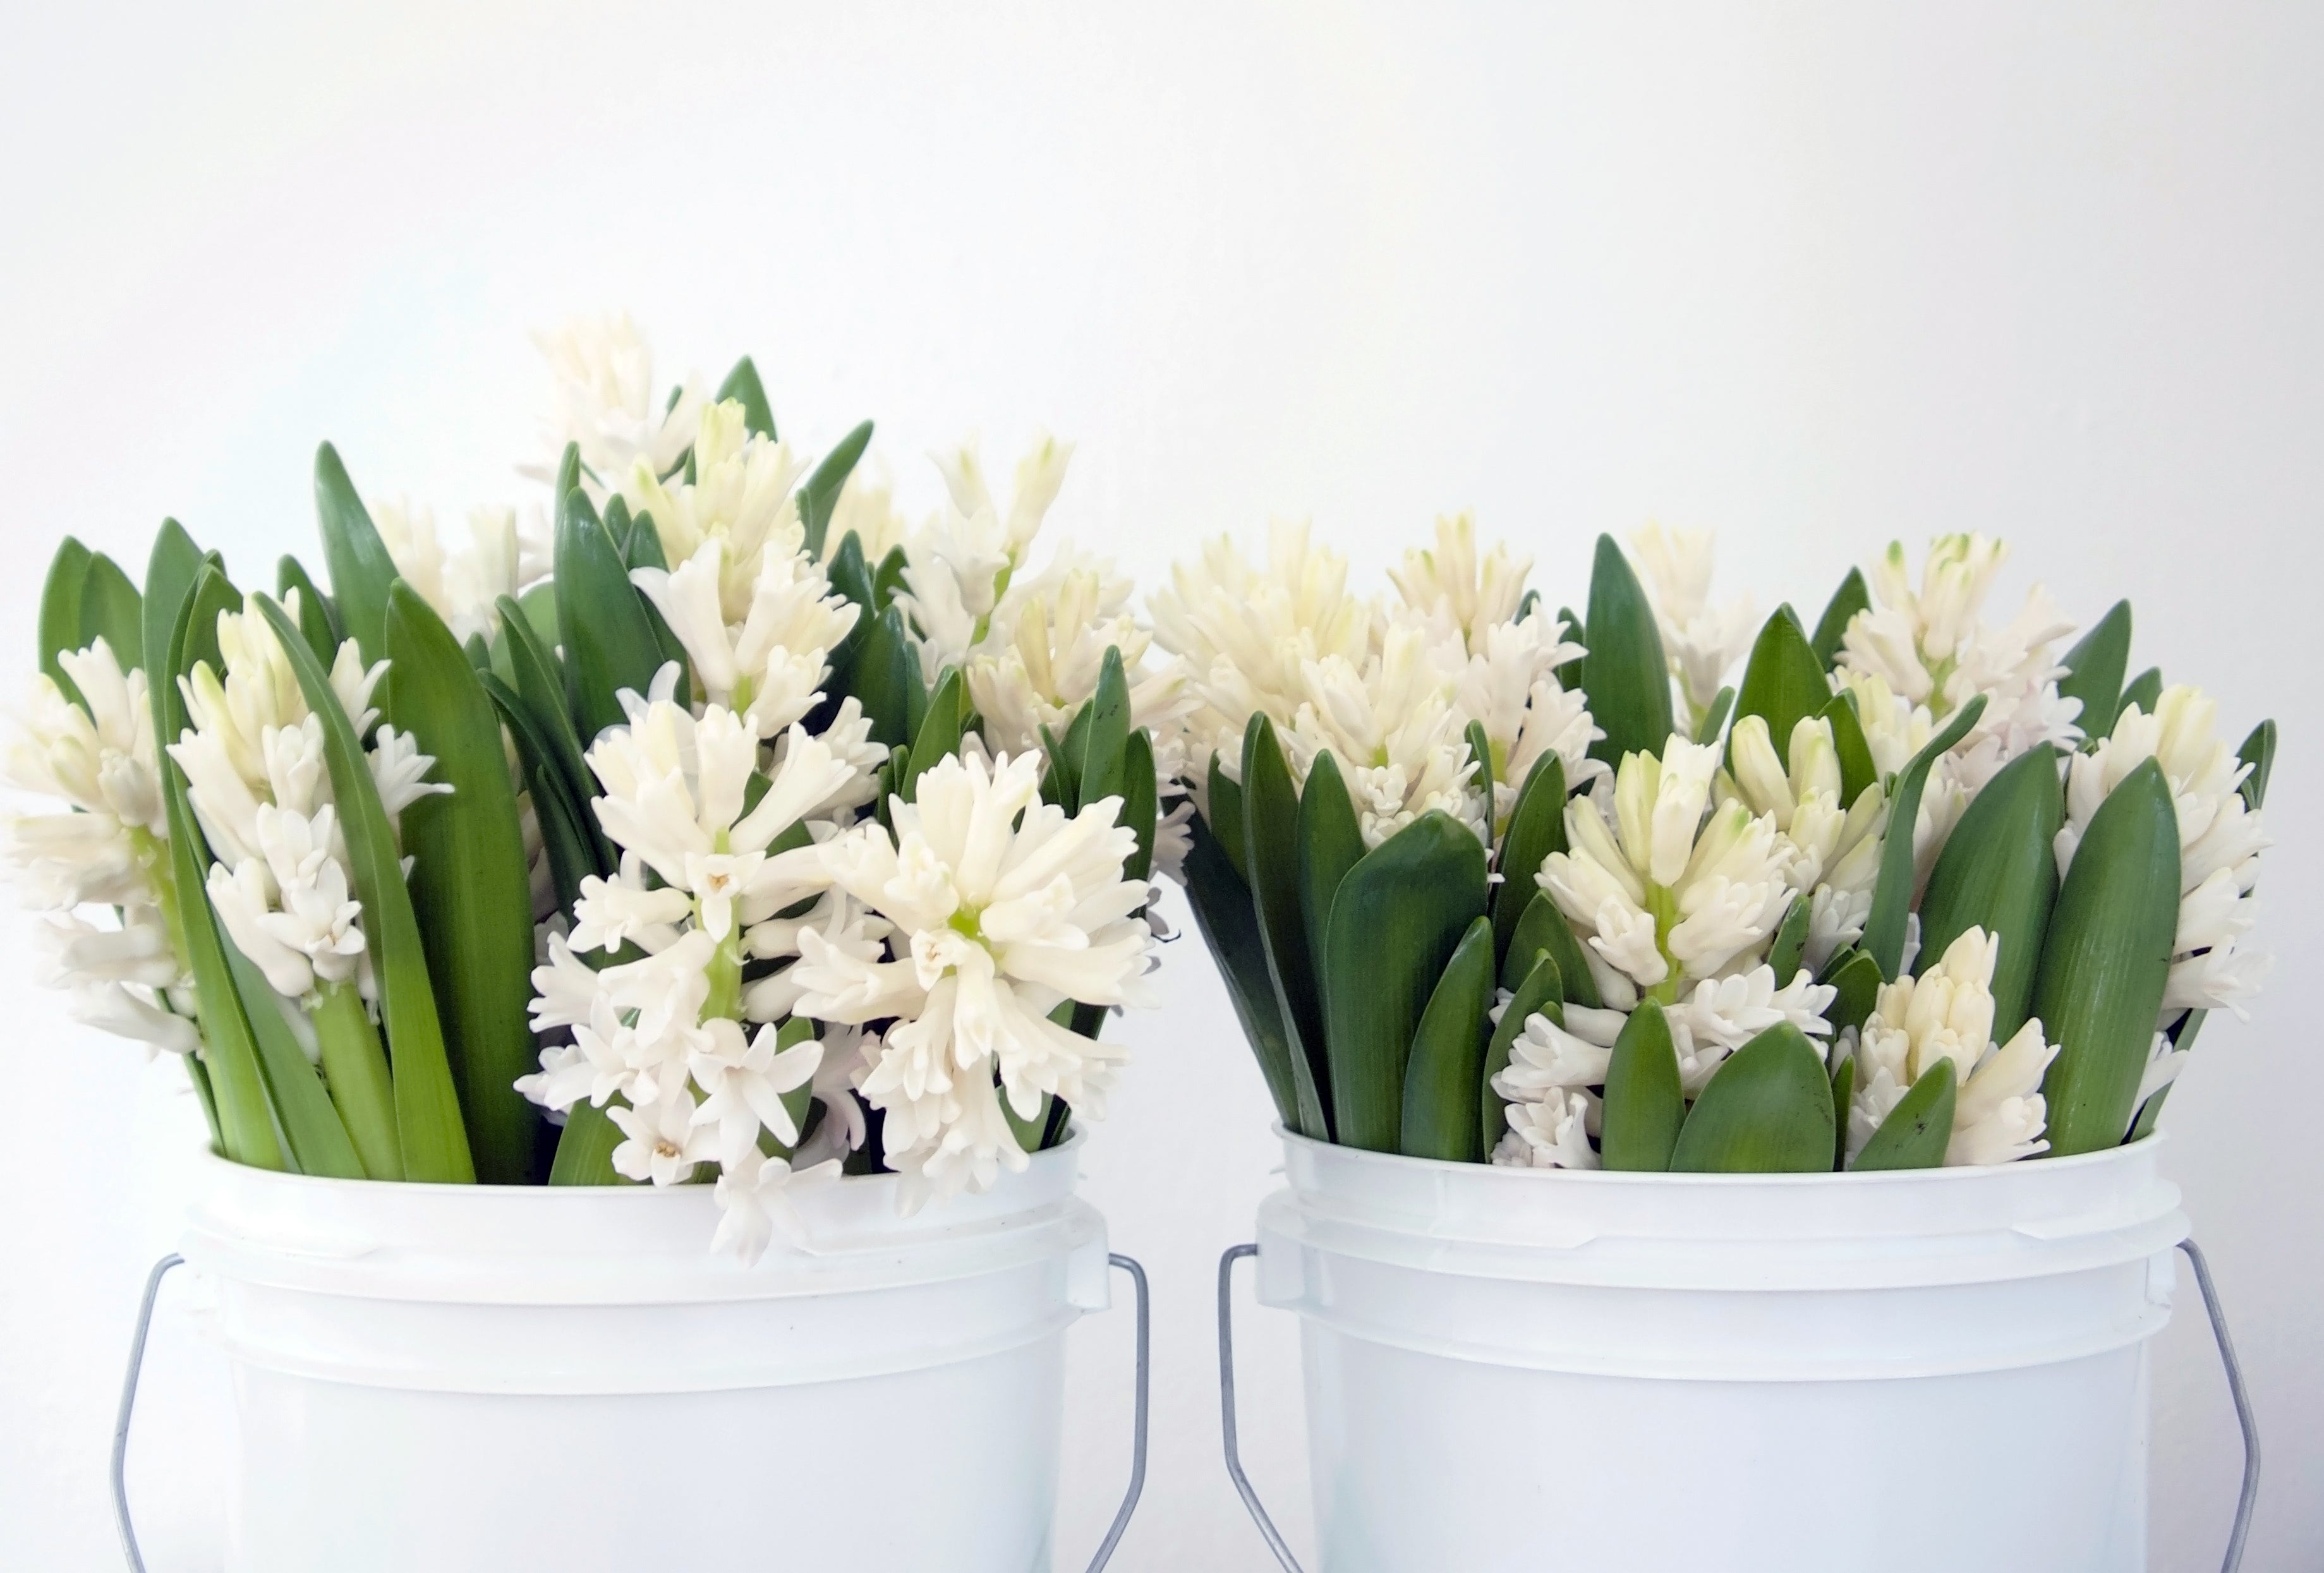 Hyacinth. Same day flower delivery Vancouver Washington and Portland Oregon. Best flower delivery Fieldwork flowers.